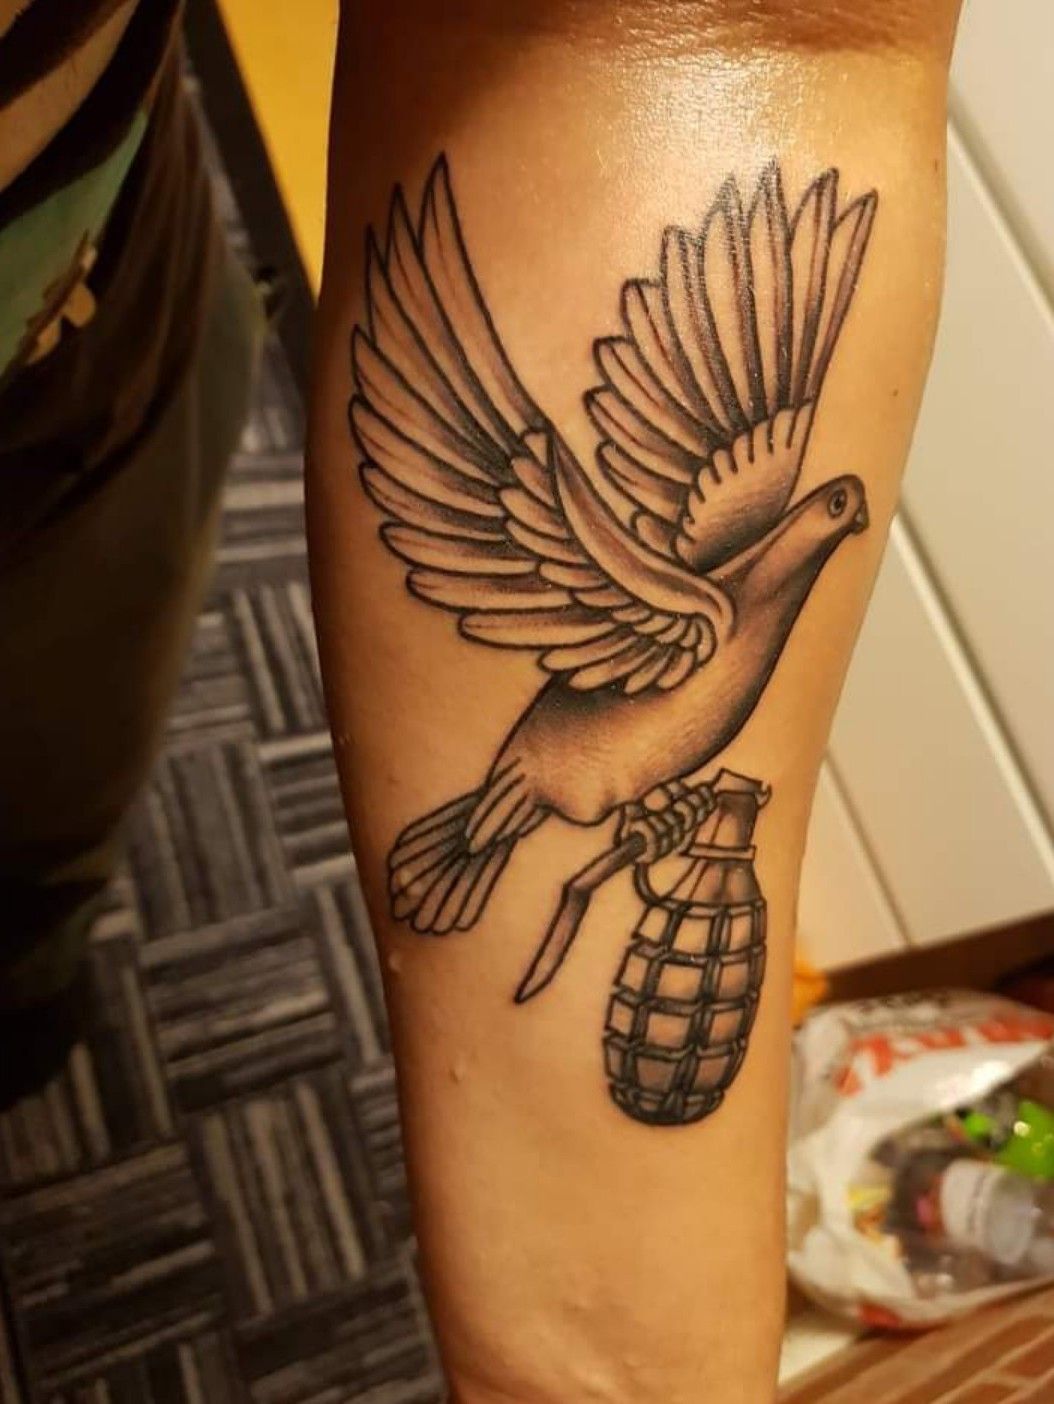 Been waiting a long time to get a dove and grenade tattoo finally pulled  the trigger on it today  rHollywoodUndead